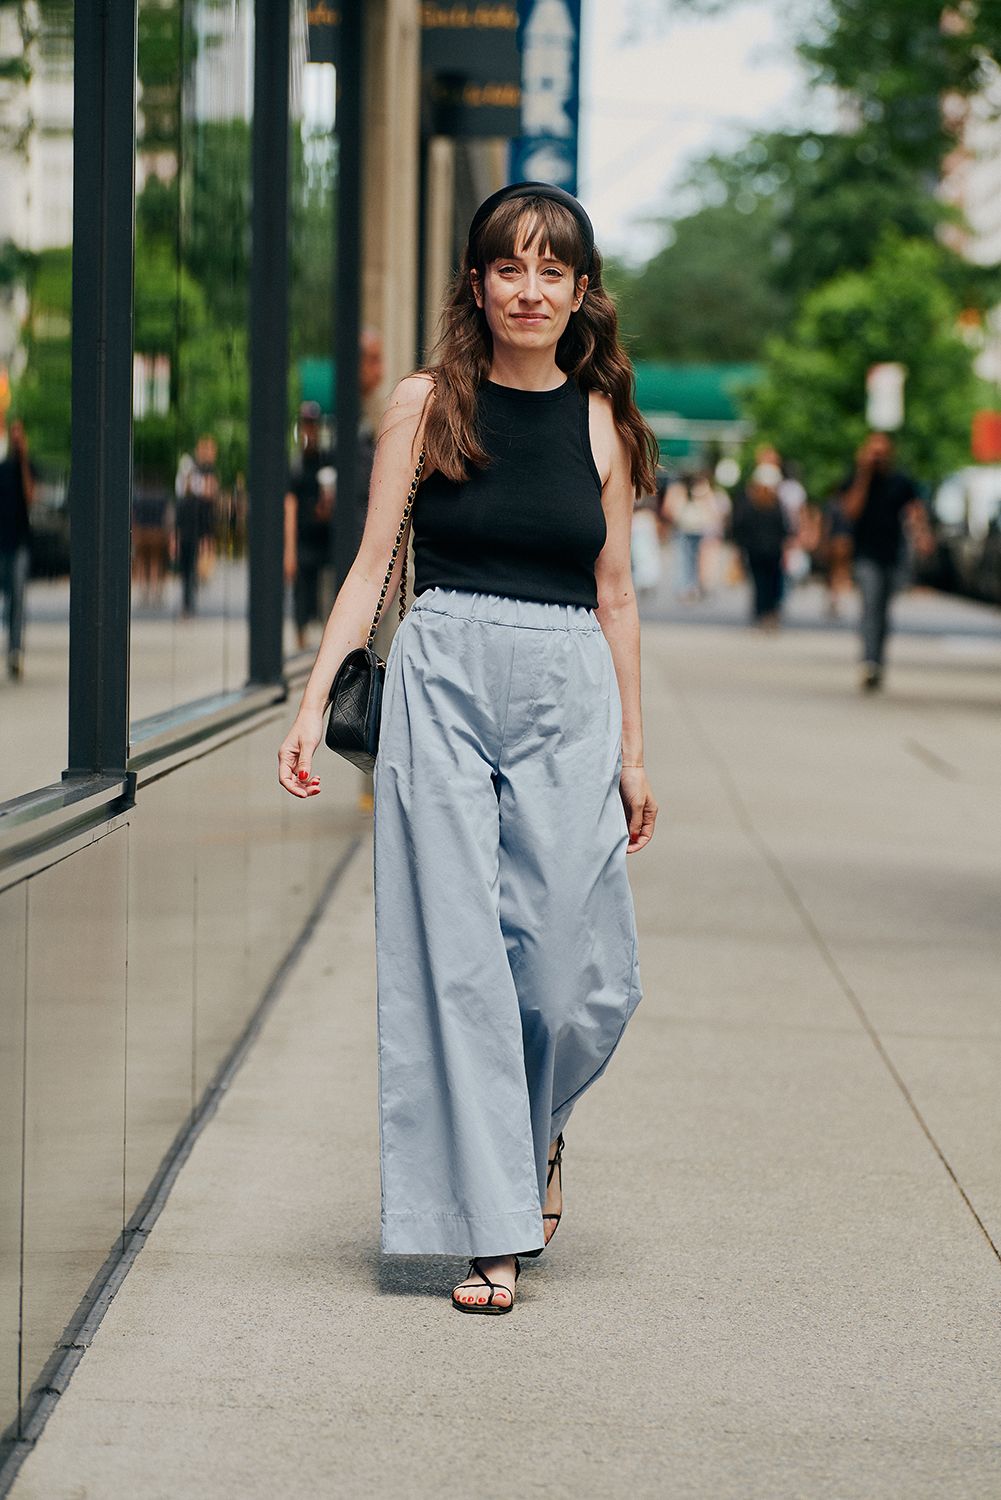 Classy Holiday Pant Outfits - the gray details